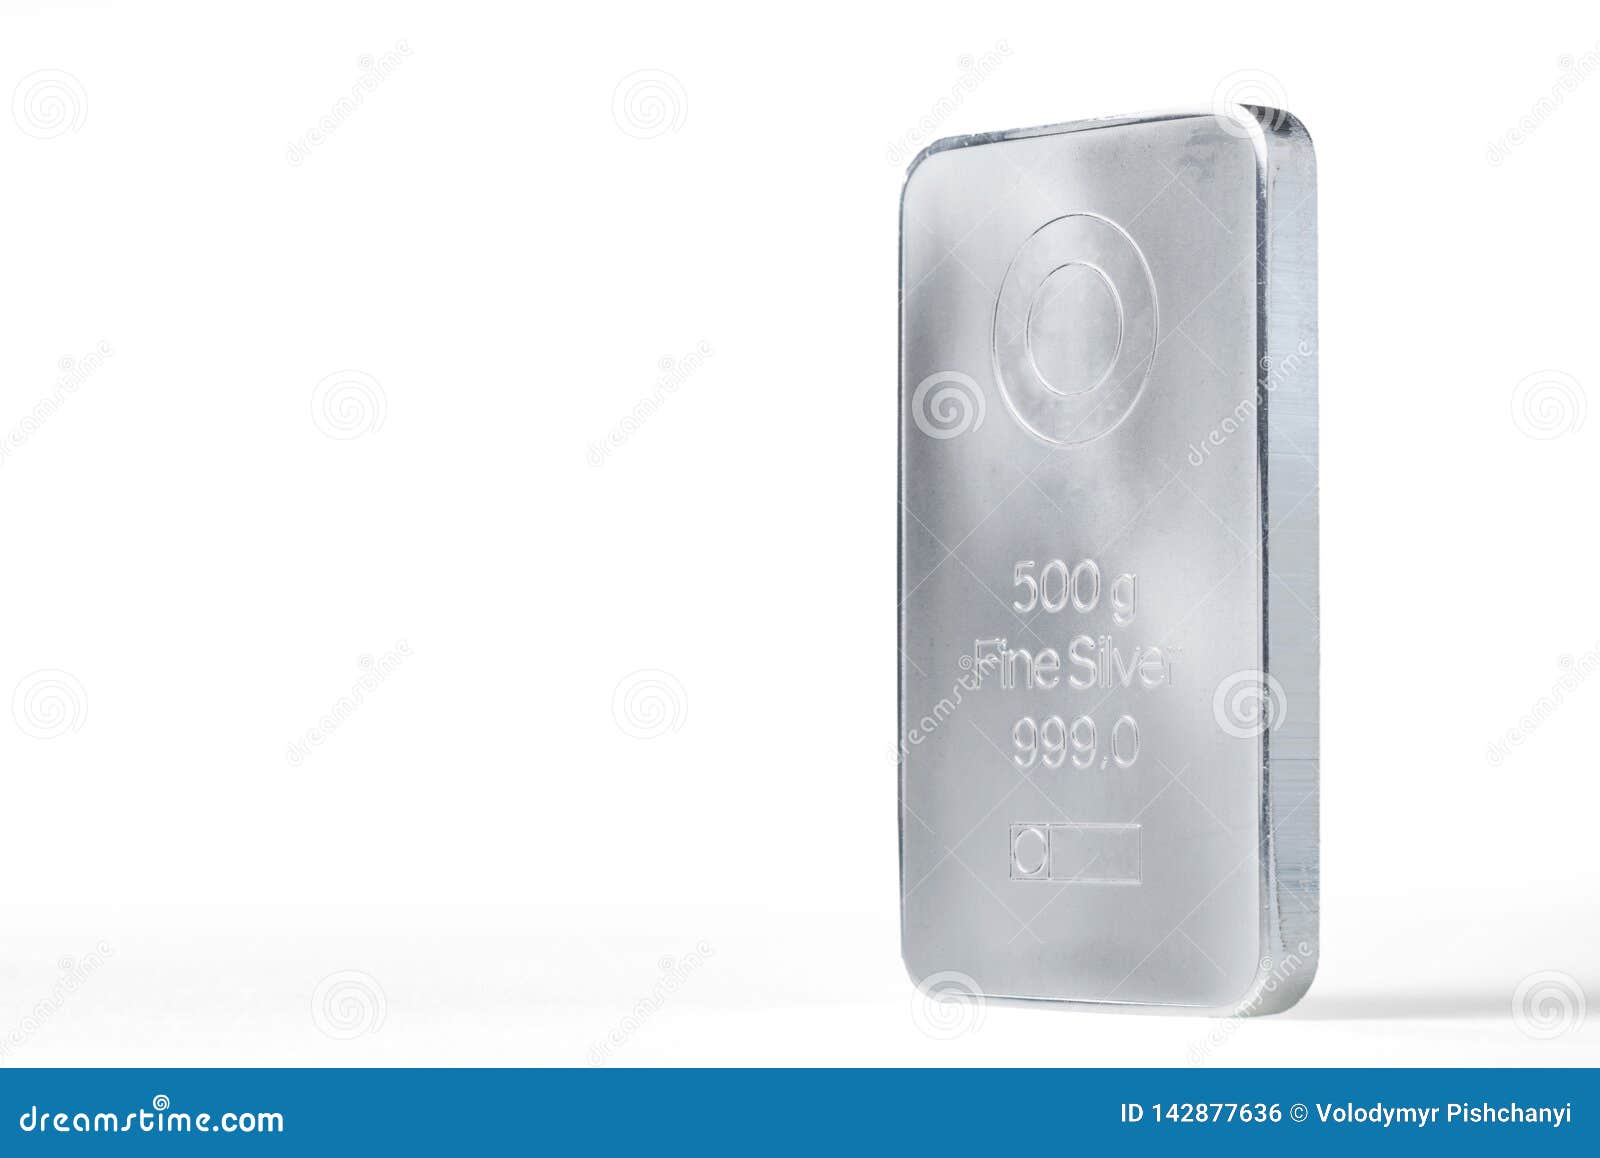 minted silver ingot weighing 500 grams  on the white background